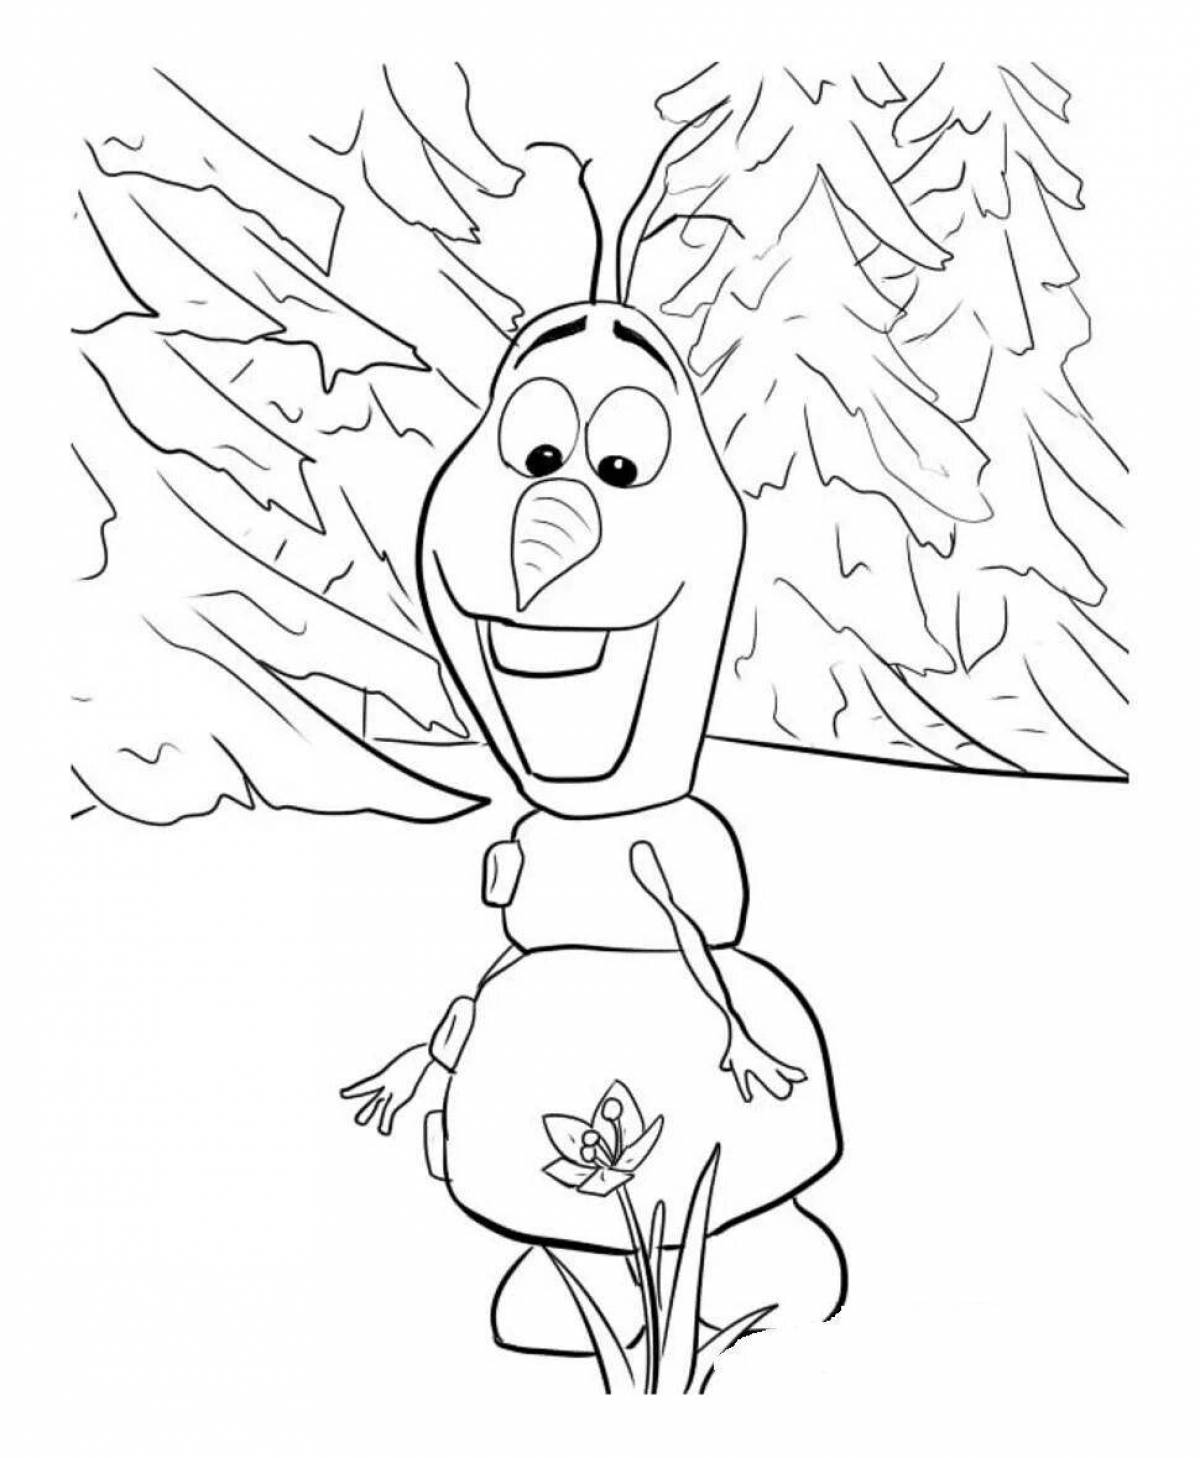 Olaf's cold heart coloring book